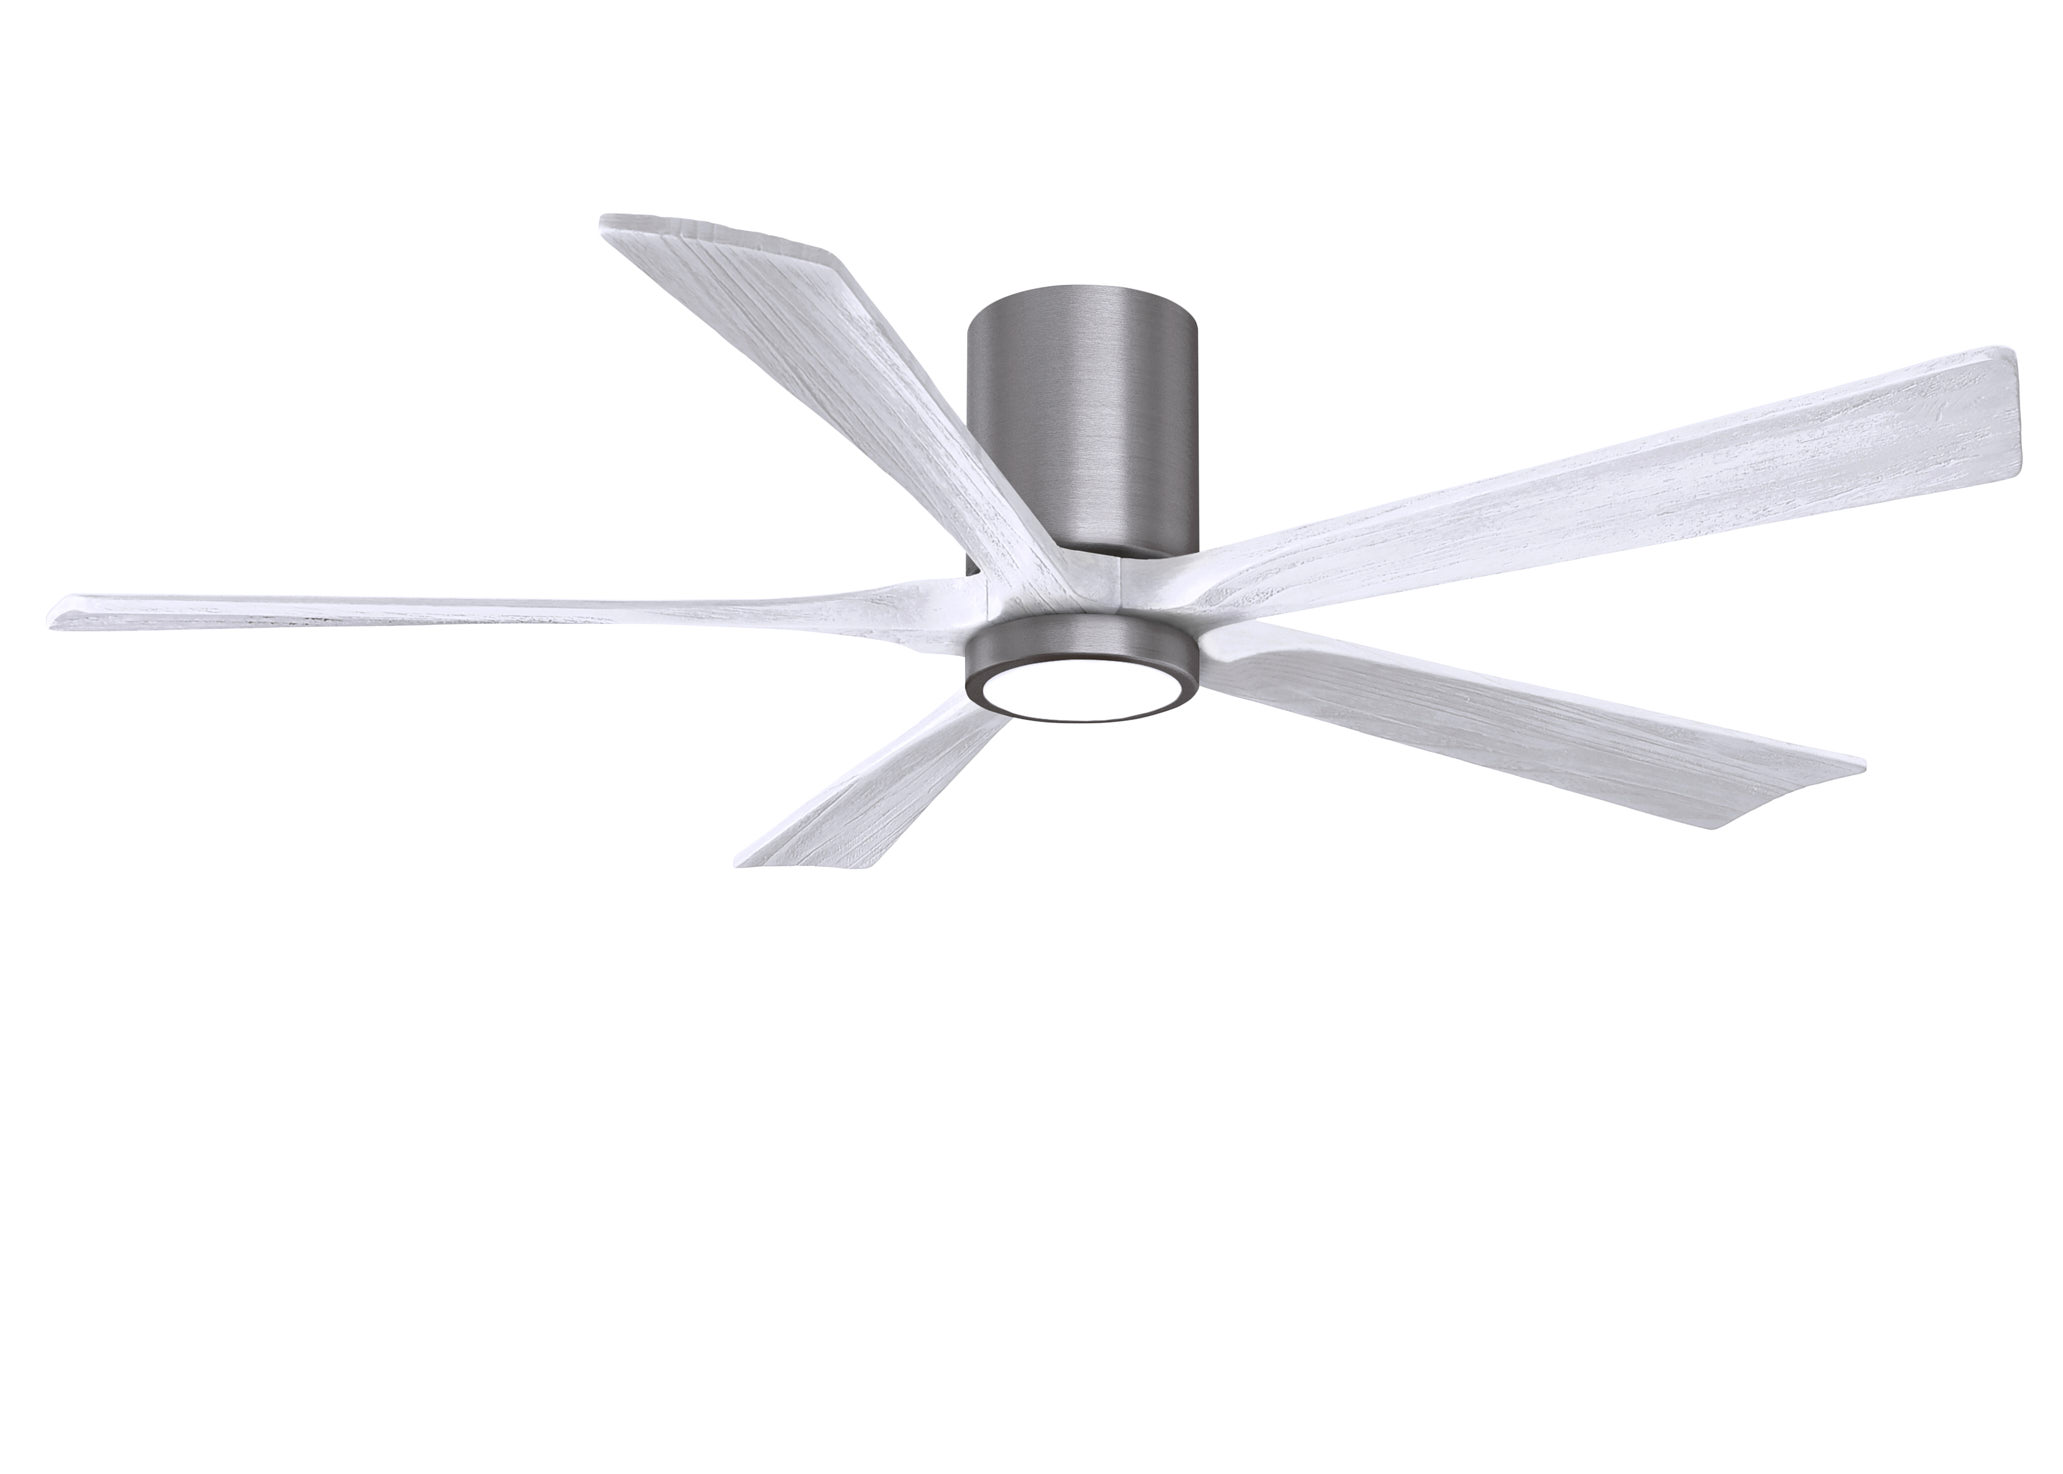 Irene-5HLK 6-speed ceiling fan in brushed pewter finish with 60